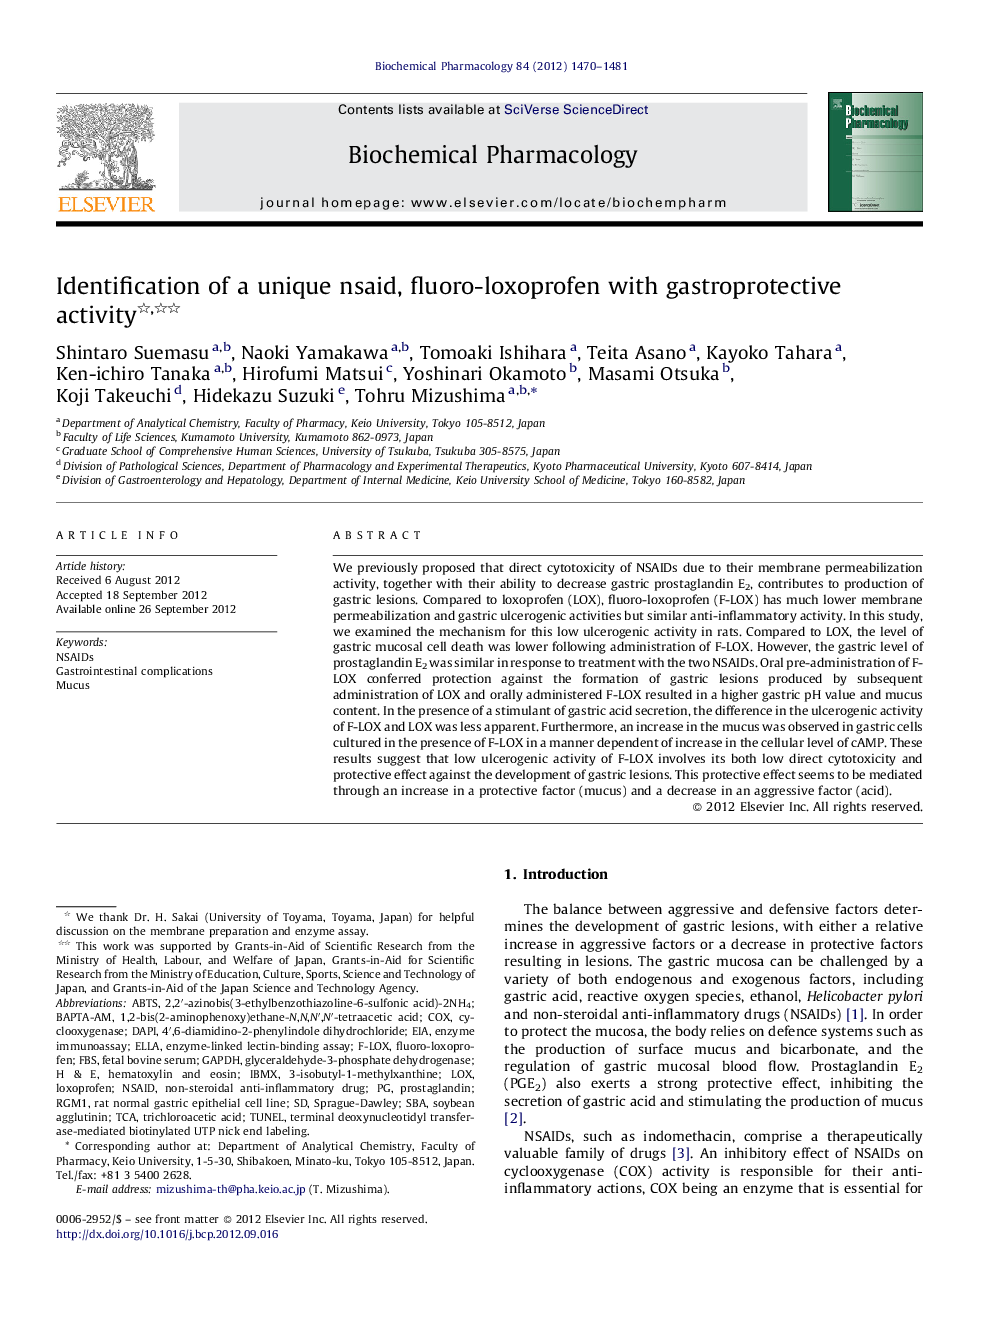 Identification of a unique nsaid, fluoro-loxoprofen with gastroprotective activity